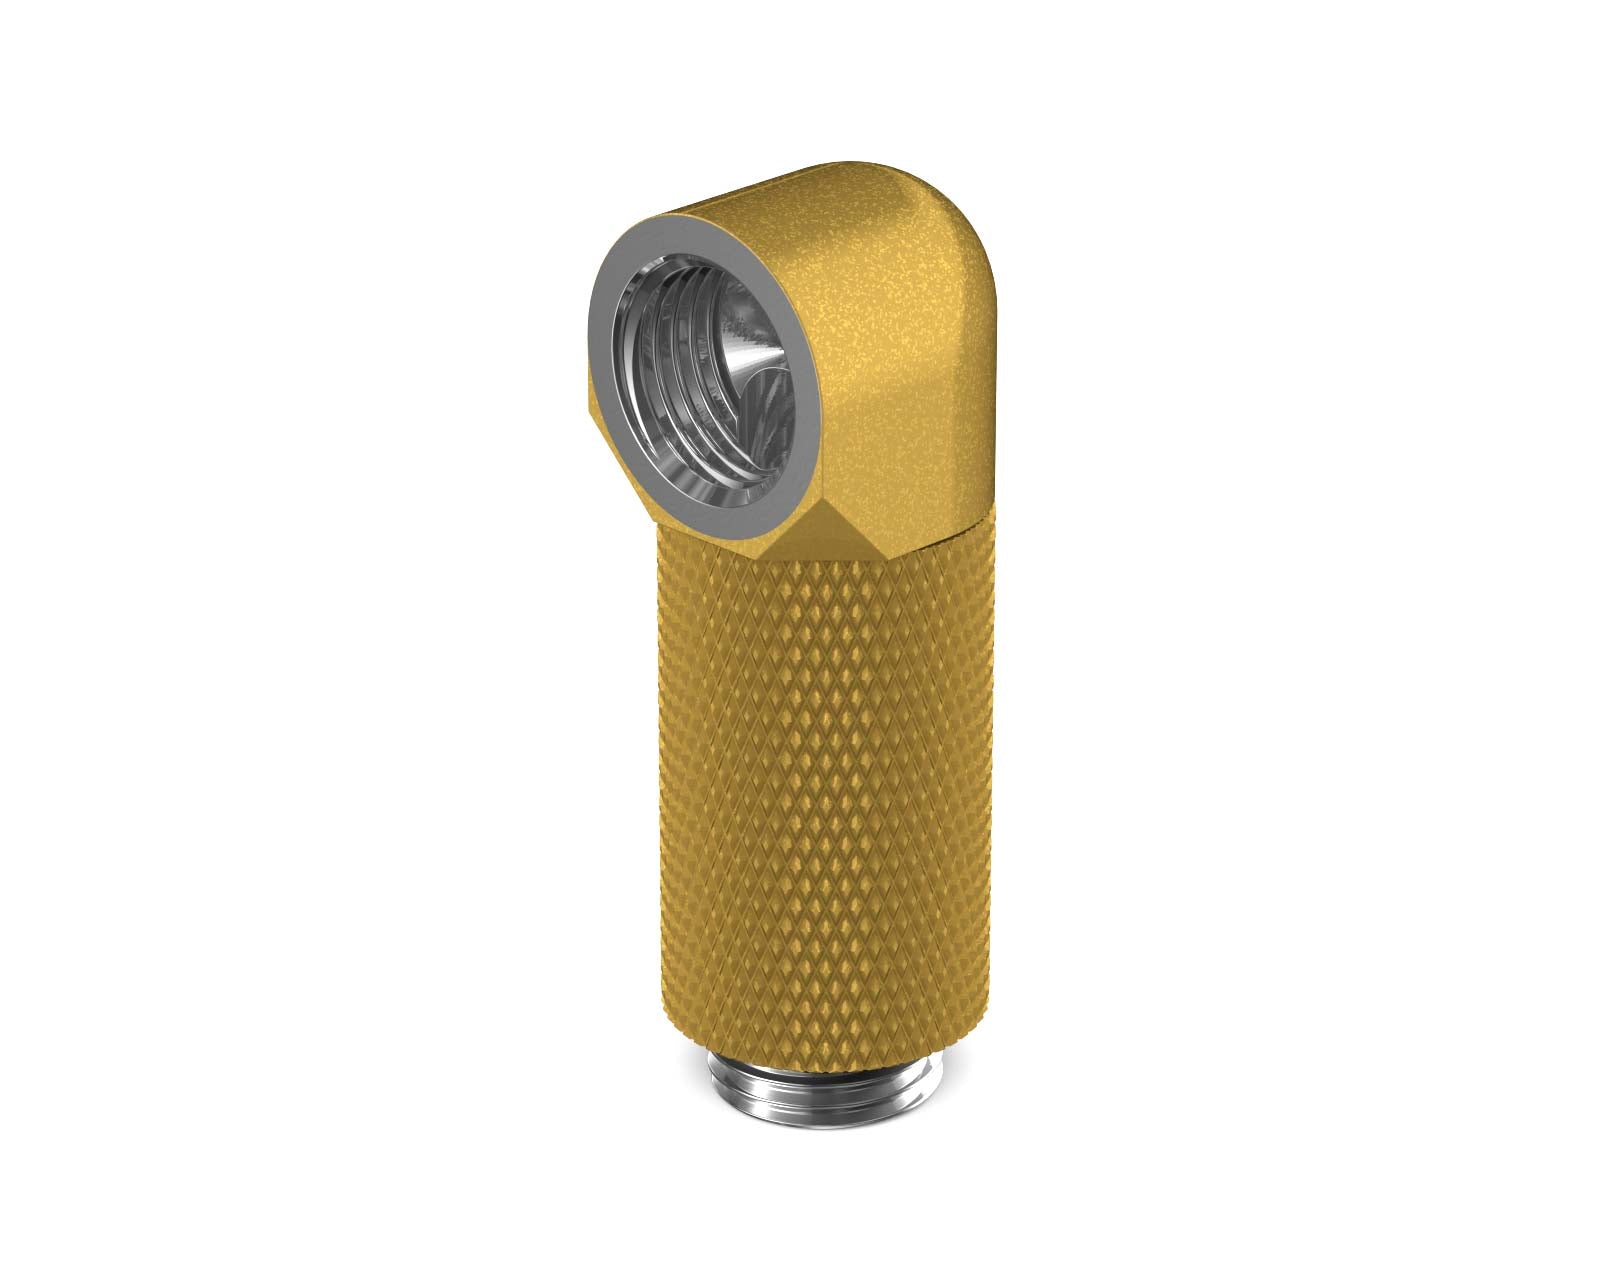 PrimoChill Male to Female G 1/4in. 90 Degree SX Rotary 30mm Extension Elbow Fitting - PrimoChill - KEEPING IT COOL Gold